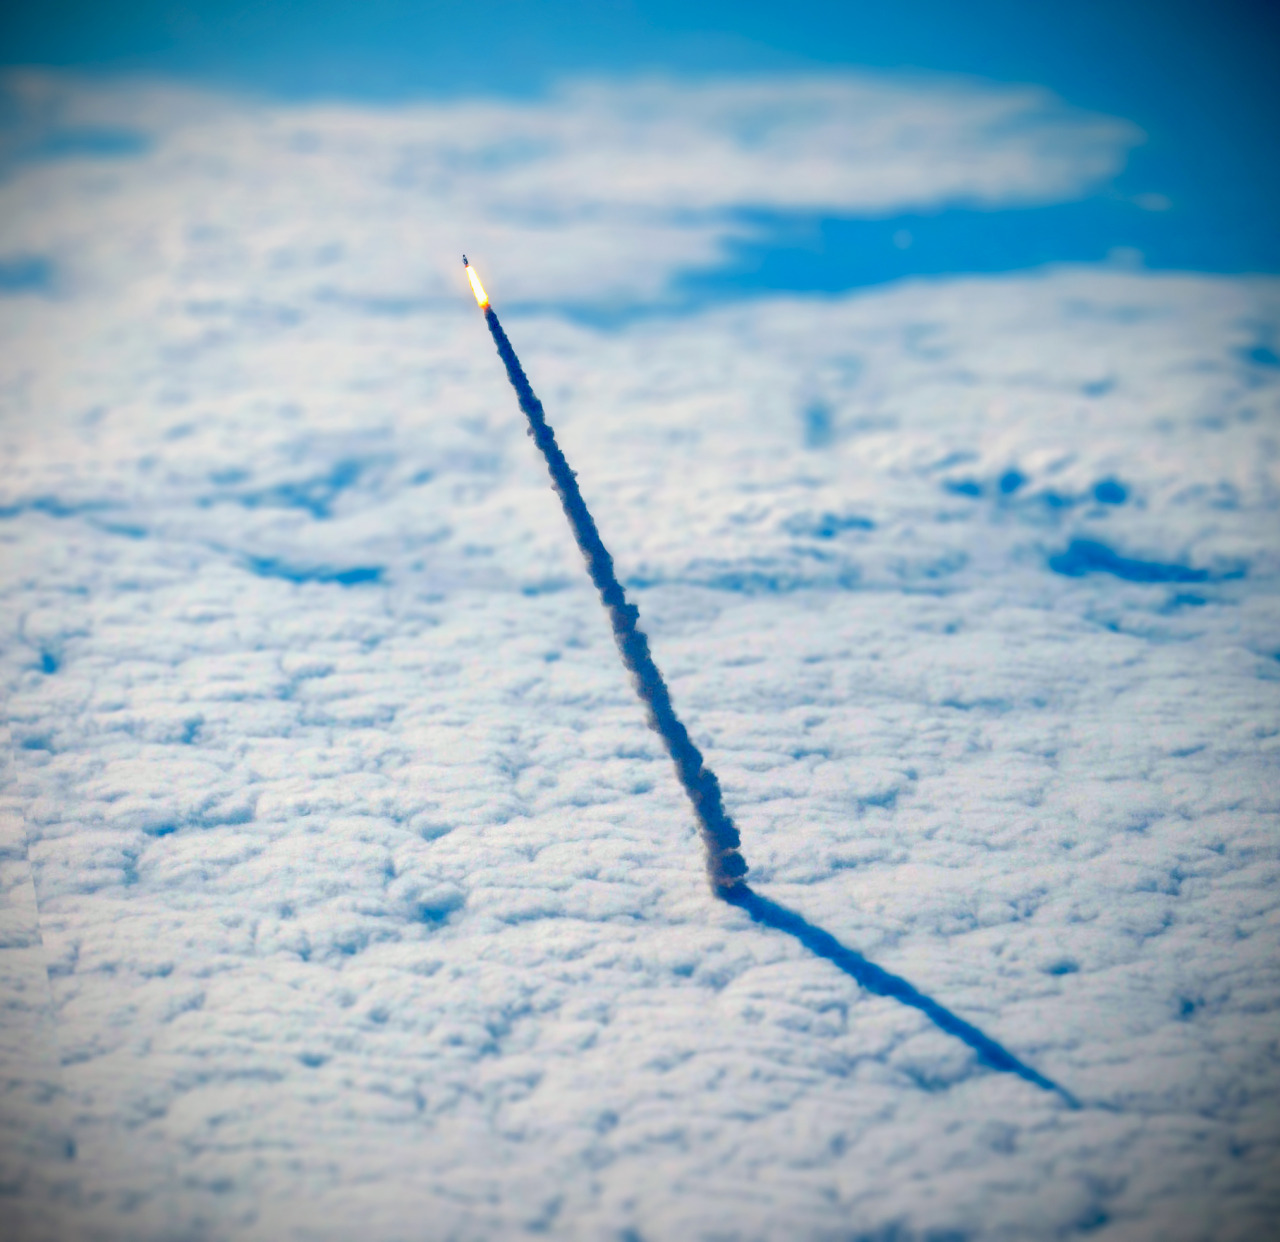 Continuing with our favorite Overviews of 2016, here is an incredible shot we shared in April of the space shuttle Endeavour, lifting through the clouds during its final launch in May 2011. This photograph was captured from a nearby NASA shuttle...